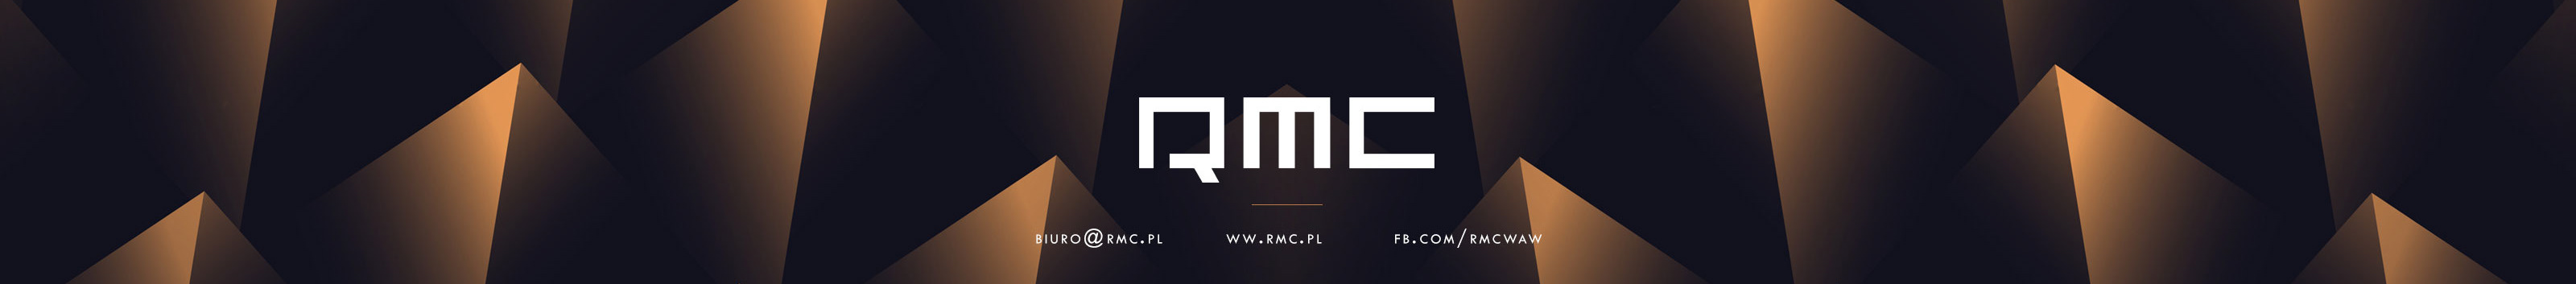 RMC Agancy's profile banner